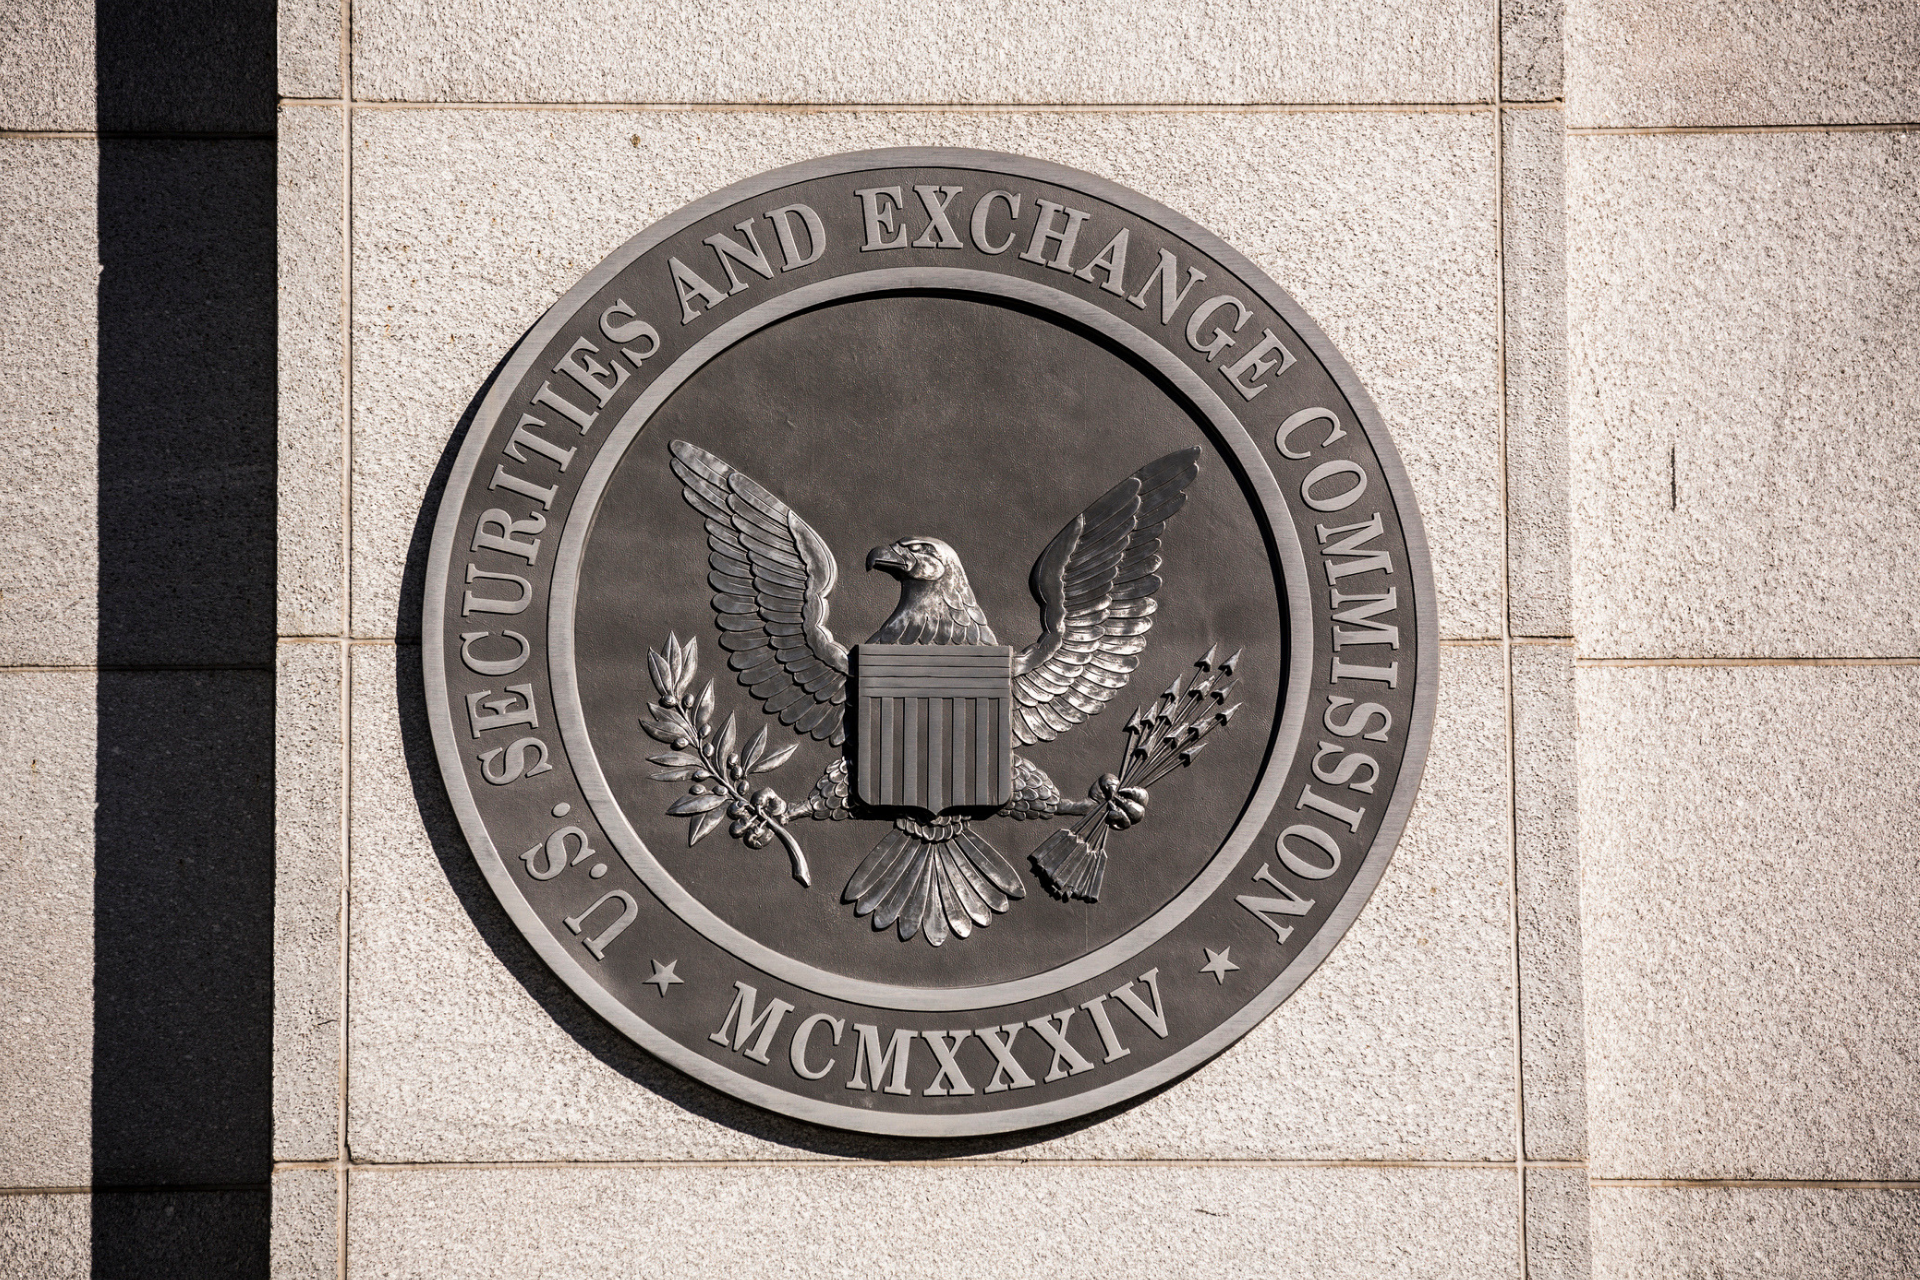 To Self-Disclose or Not Self-Disclose? Thoughts from SEC’s Enforcement Director